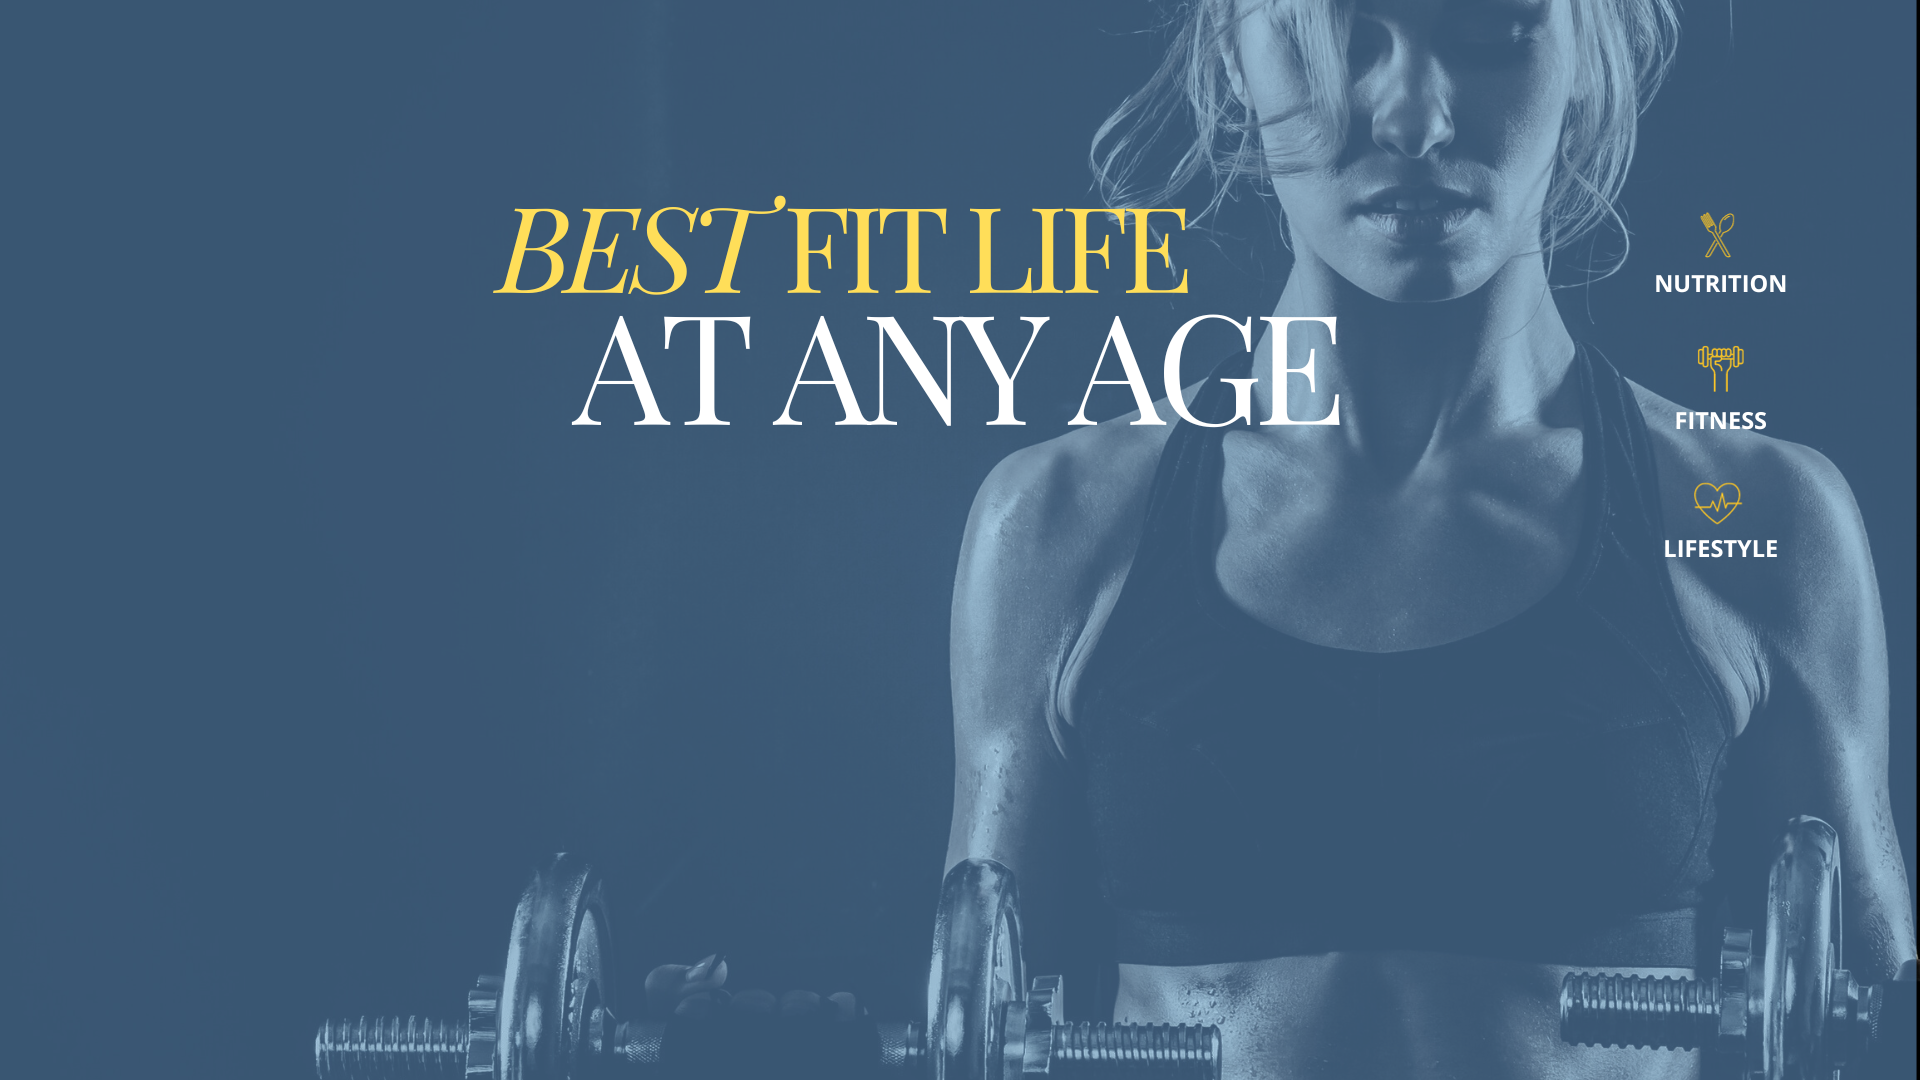 Sunday 1:00 PM – 1:45 PM<br>BEST FITLIFE AT ANY AGE  & BATTLE OF THE AGES PUSH UP CHALLENGE